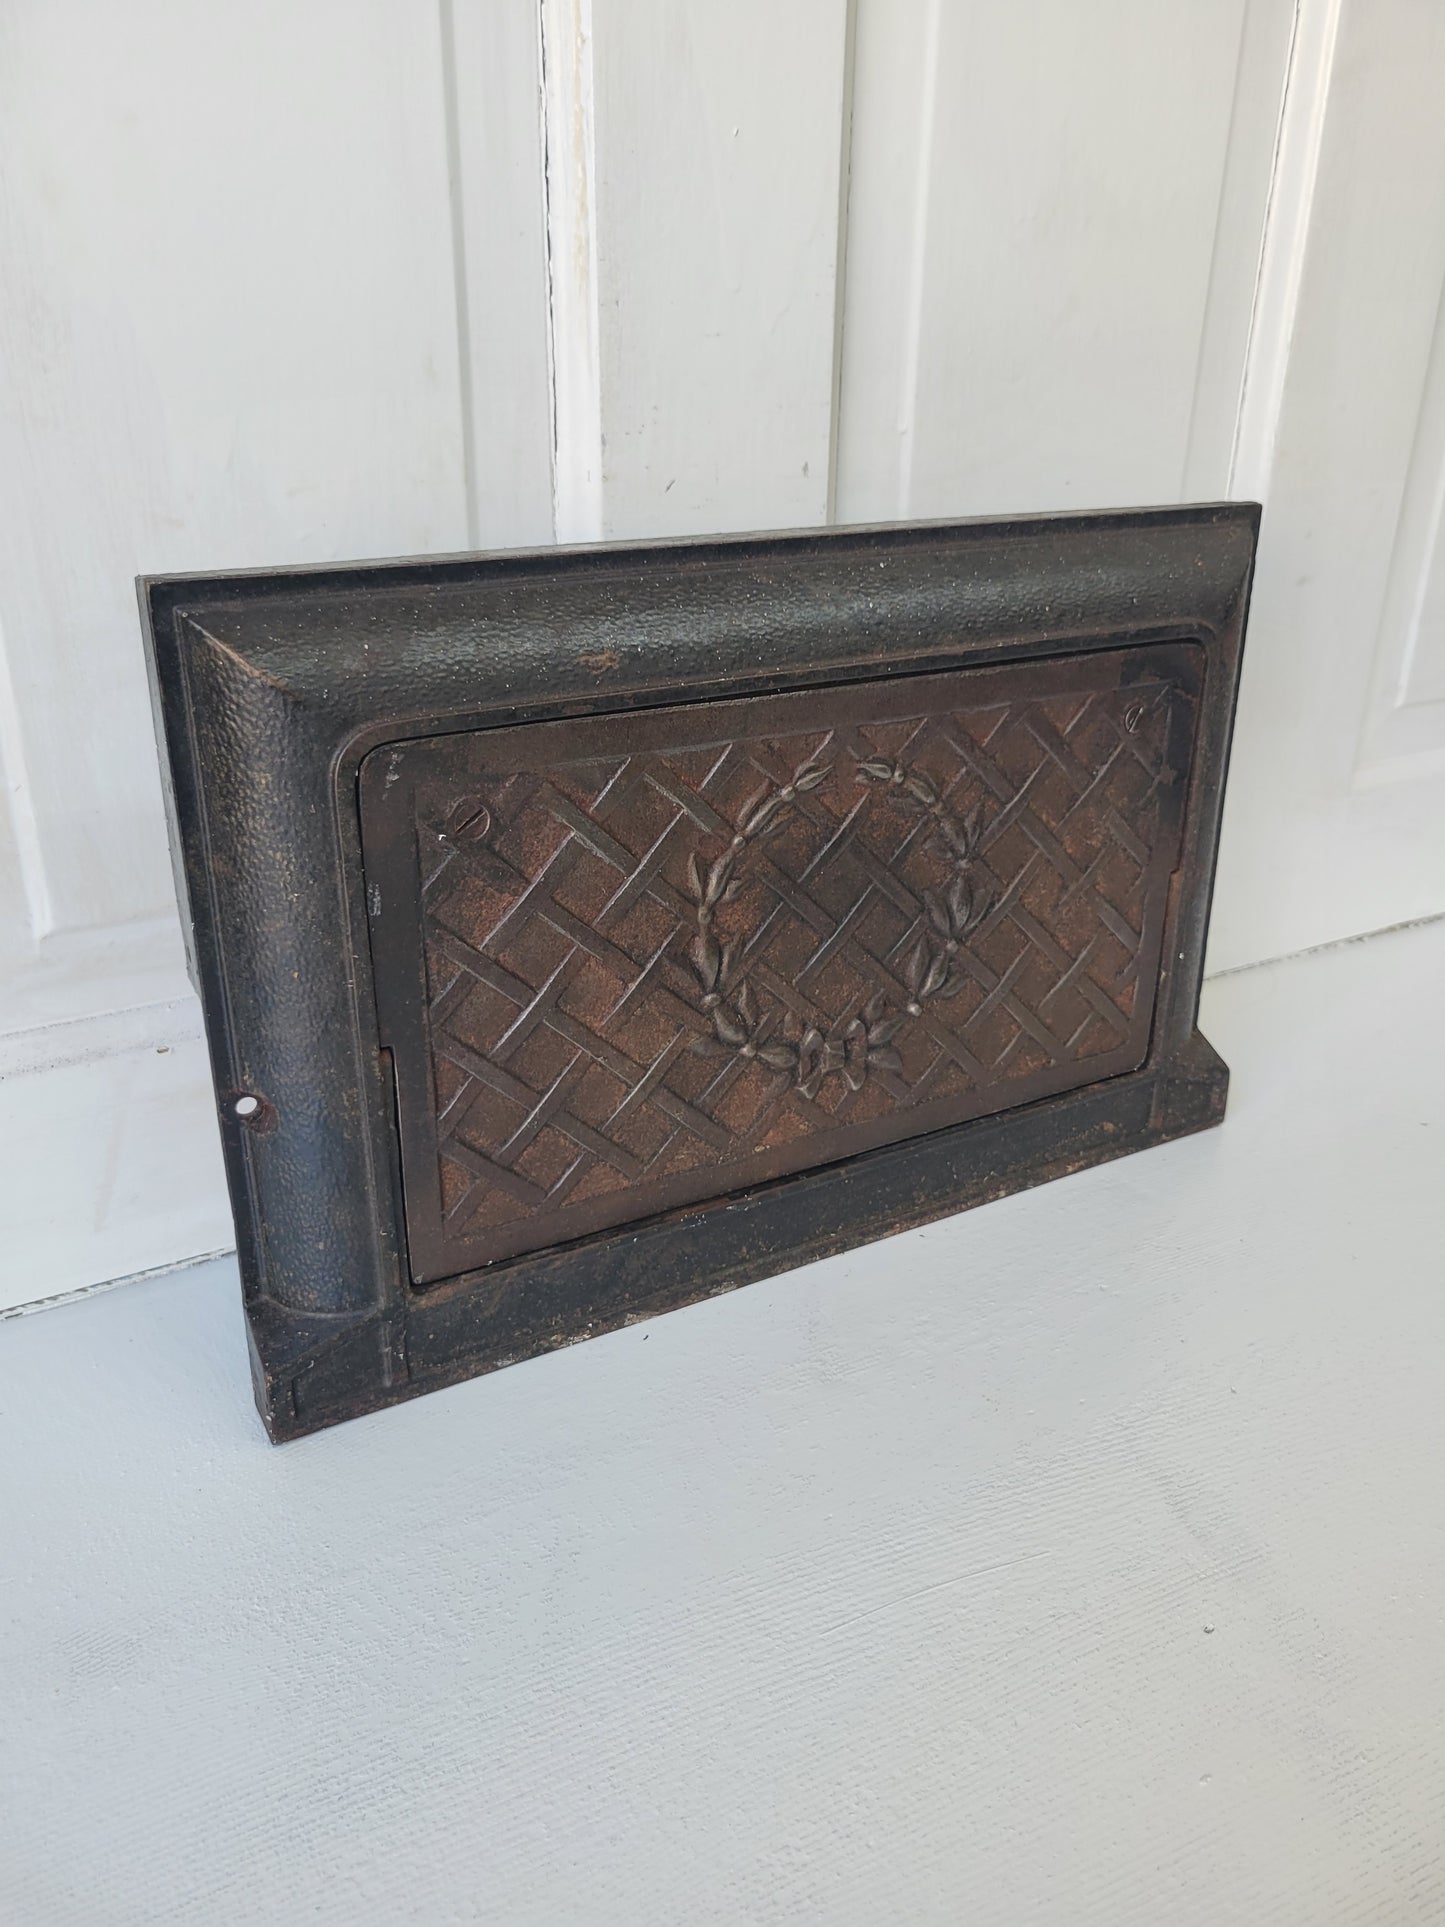 10 x 16 Fancy Cast Iron Fold Out Vent Cover, Antique Floor Register Cover with Dampers #080104